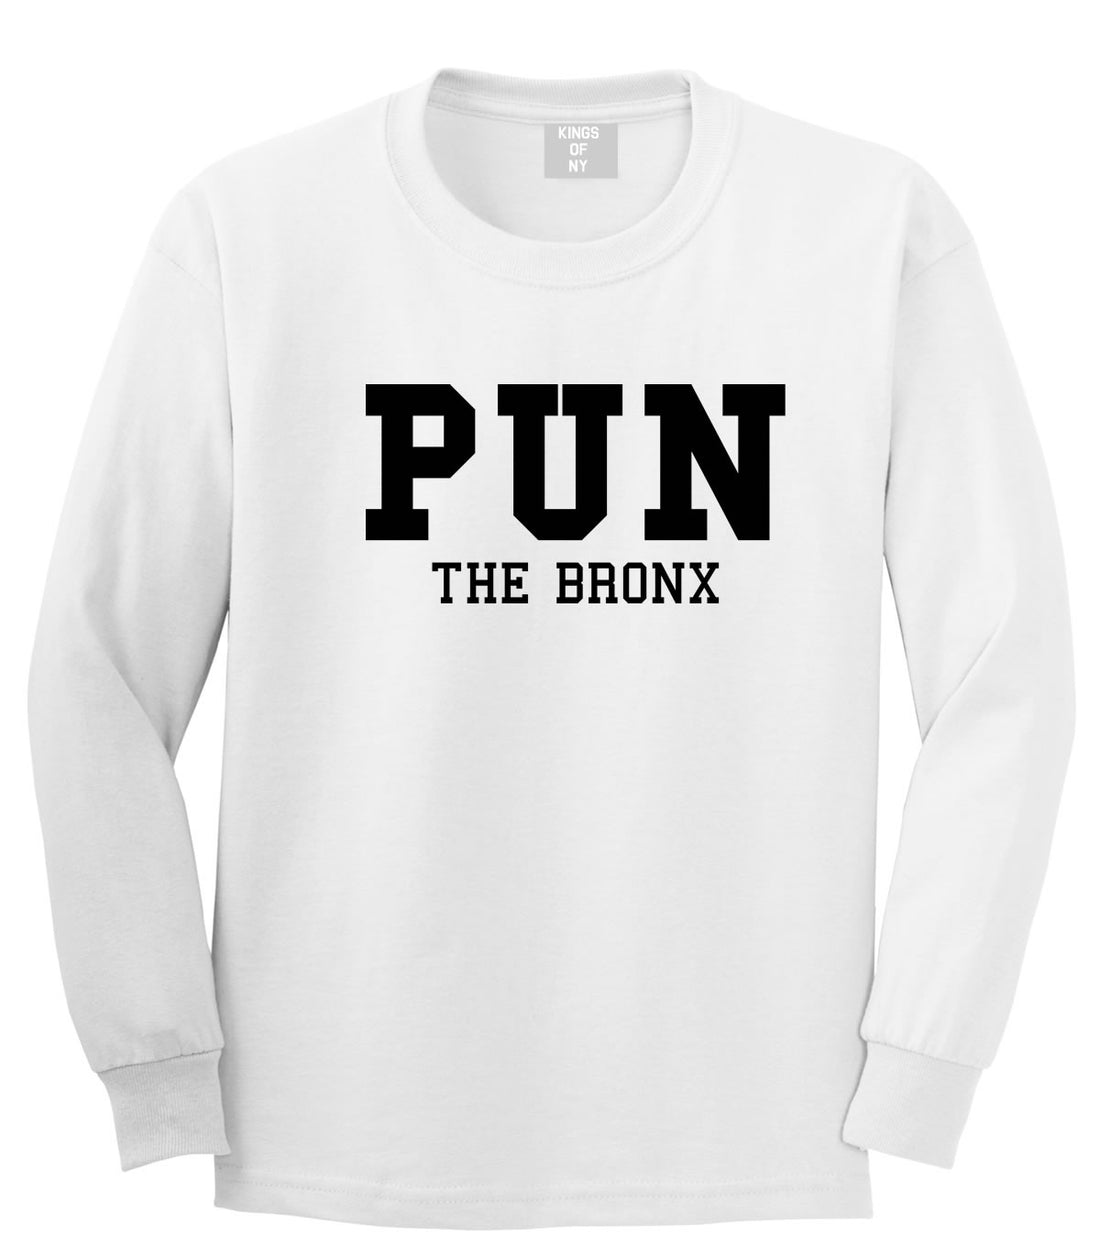 Pun The Bronx Long Sleeve T-Shirt in White by Kings Of NY